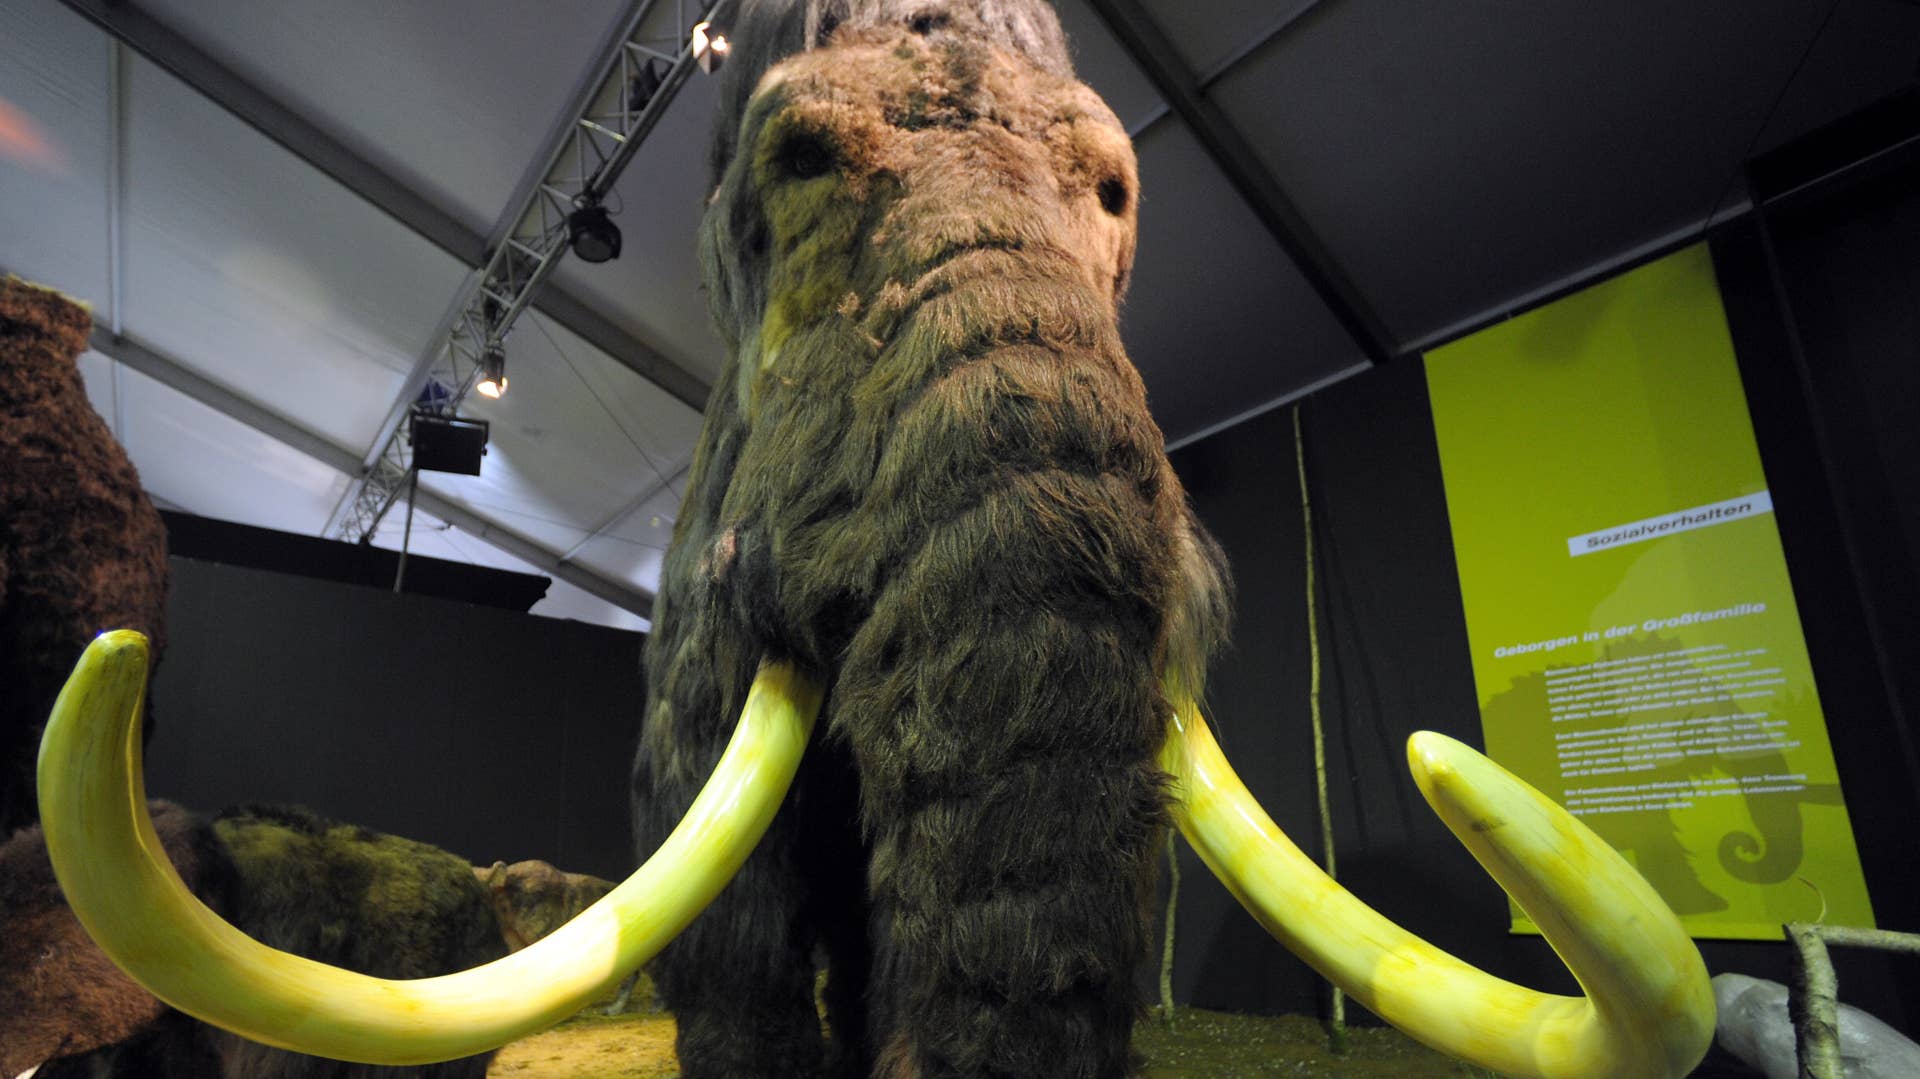 Two replicas of mammoths are seen during exhibition opening in Germany